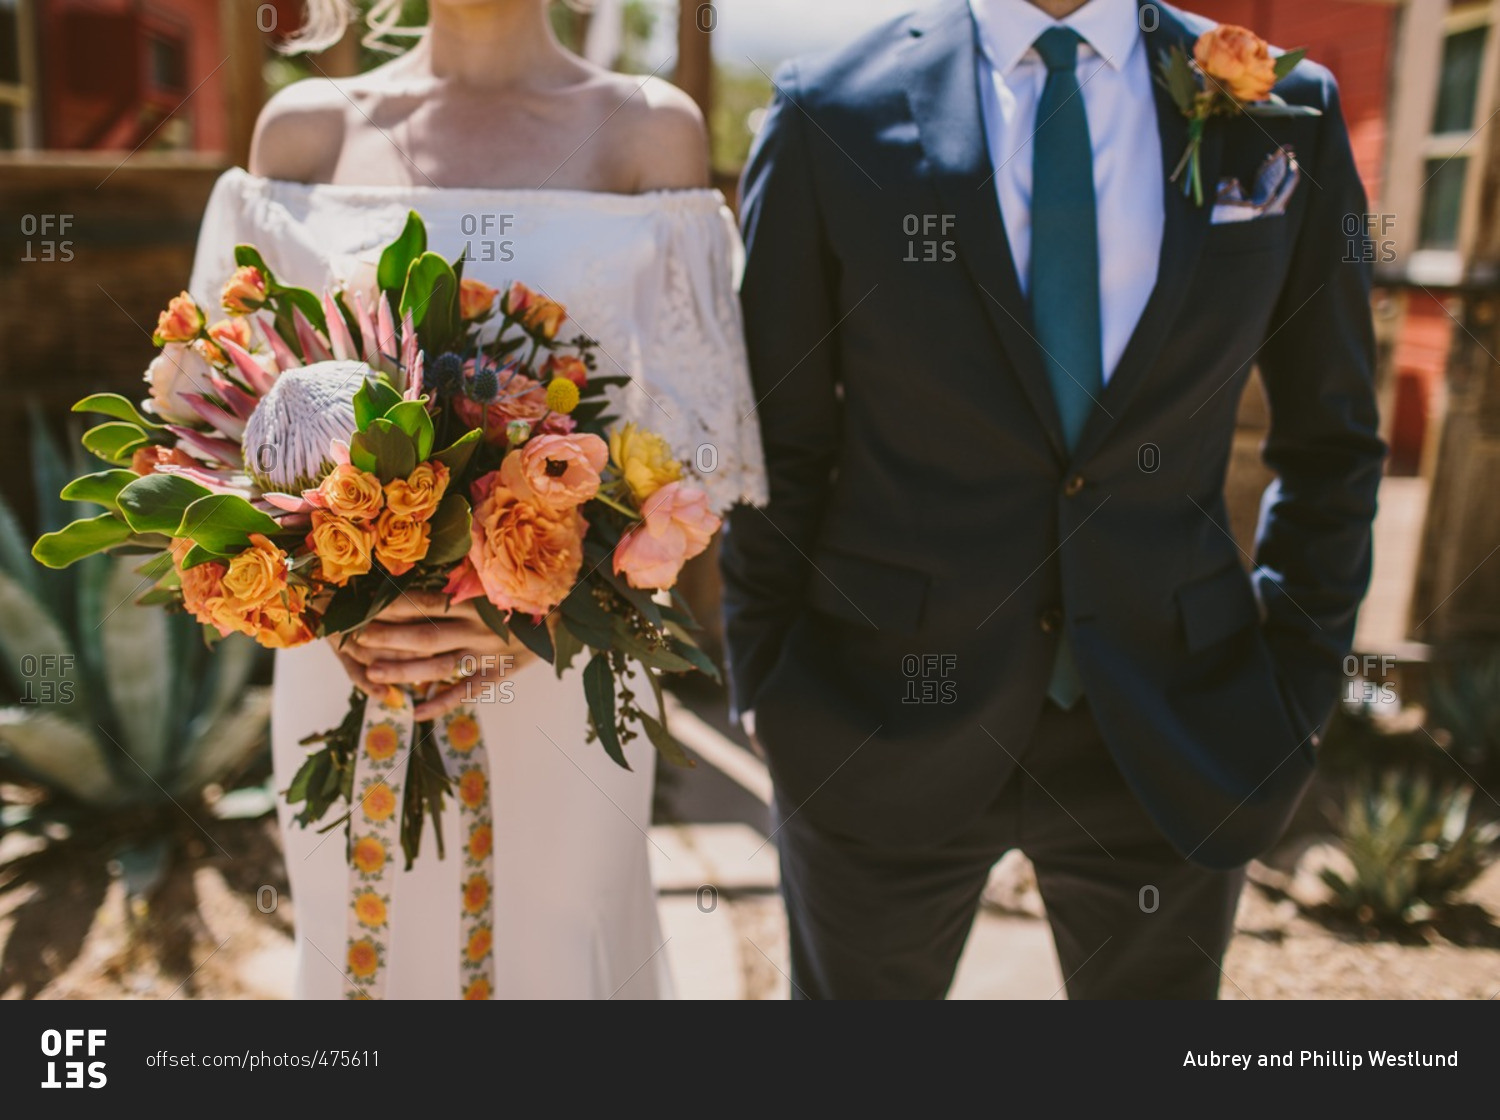 Mid-section of groom and bride holding floral bouquet